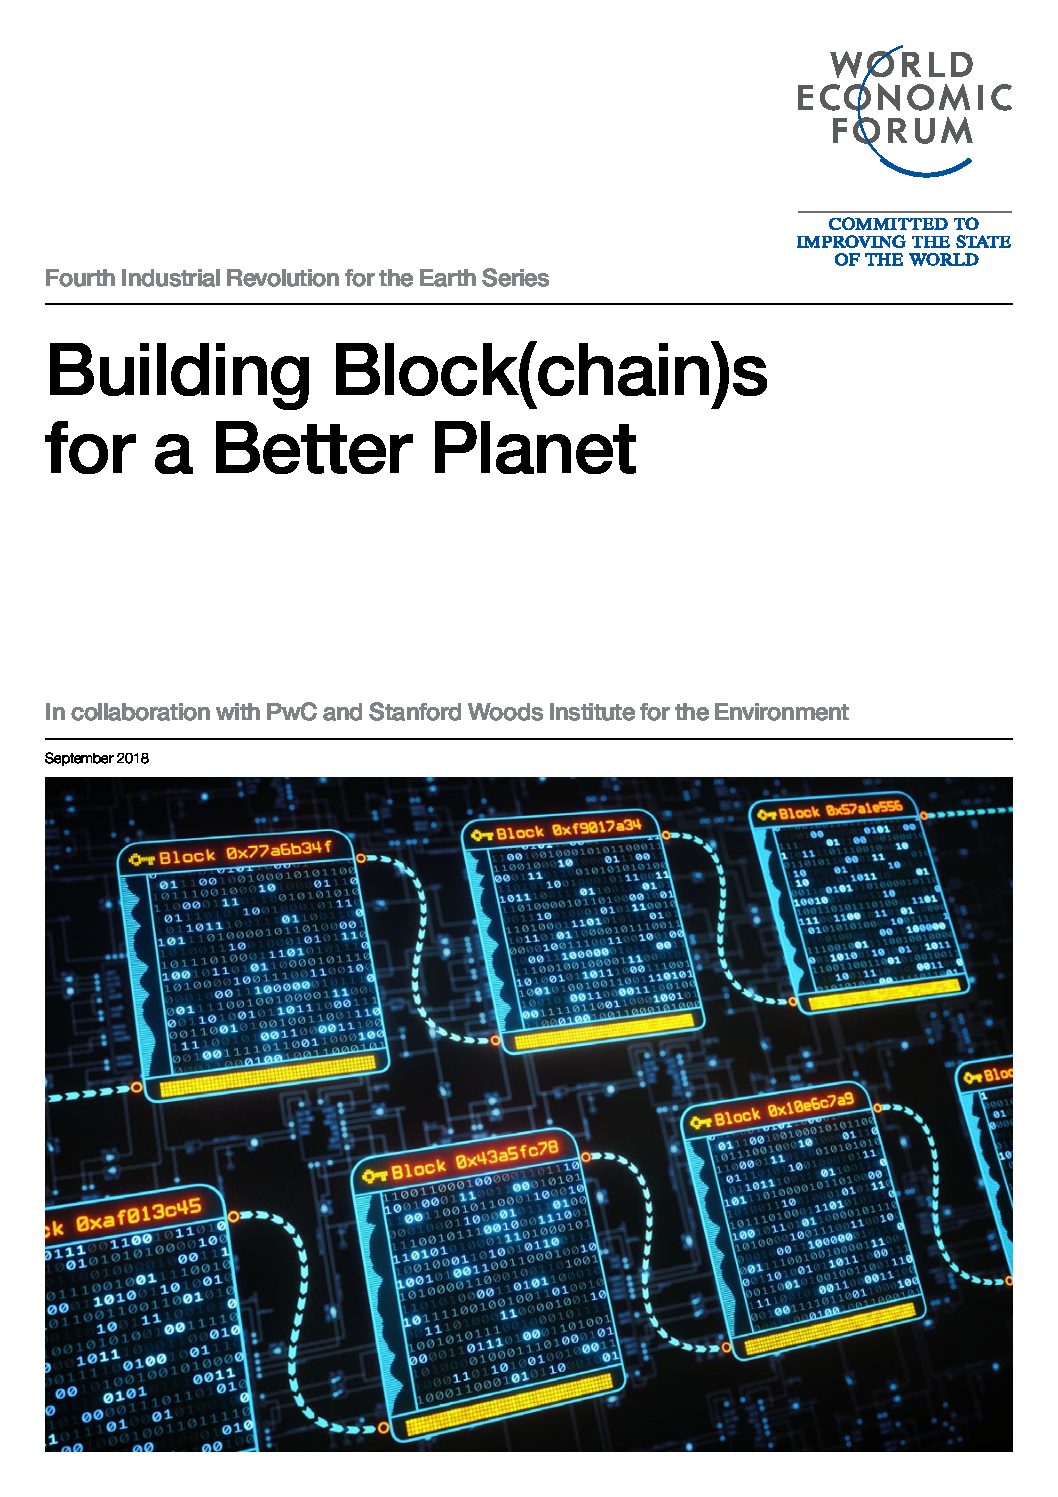 Building Block(chain)s for a Better Planet